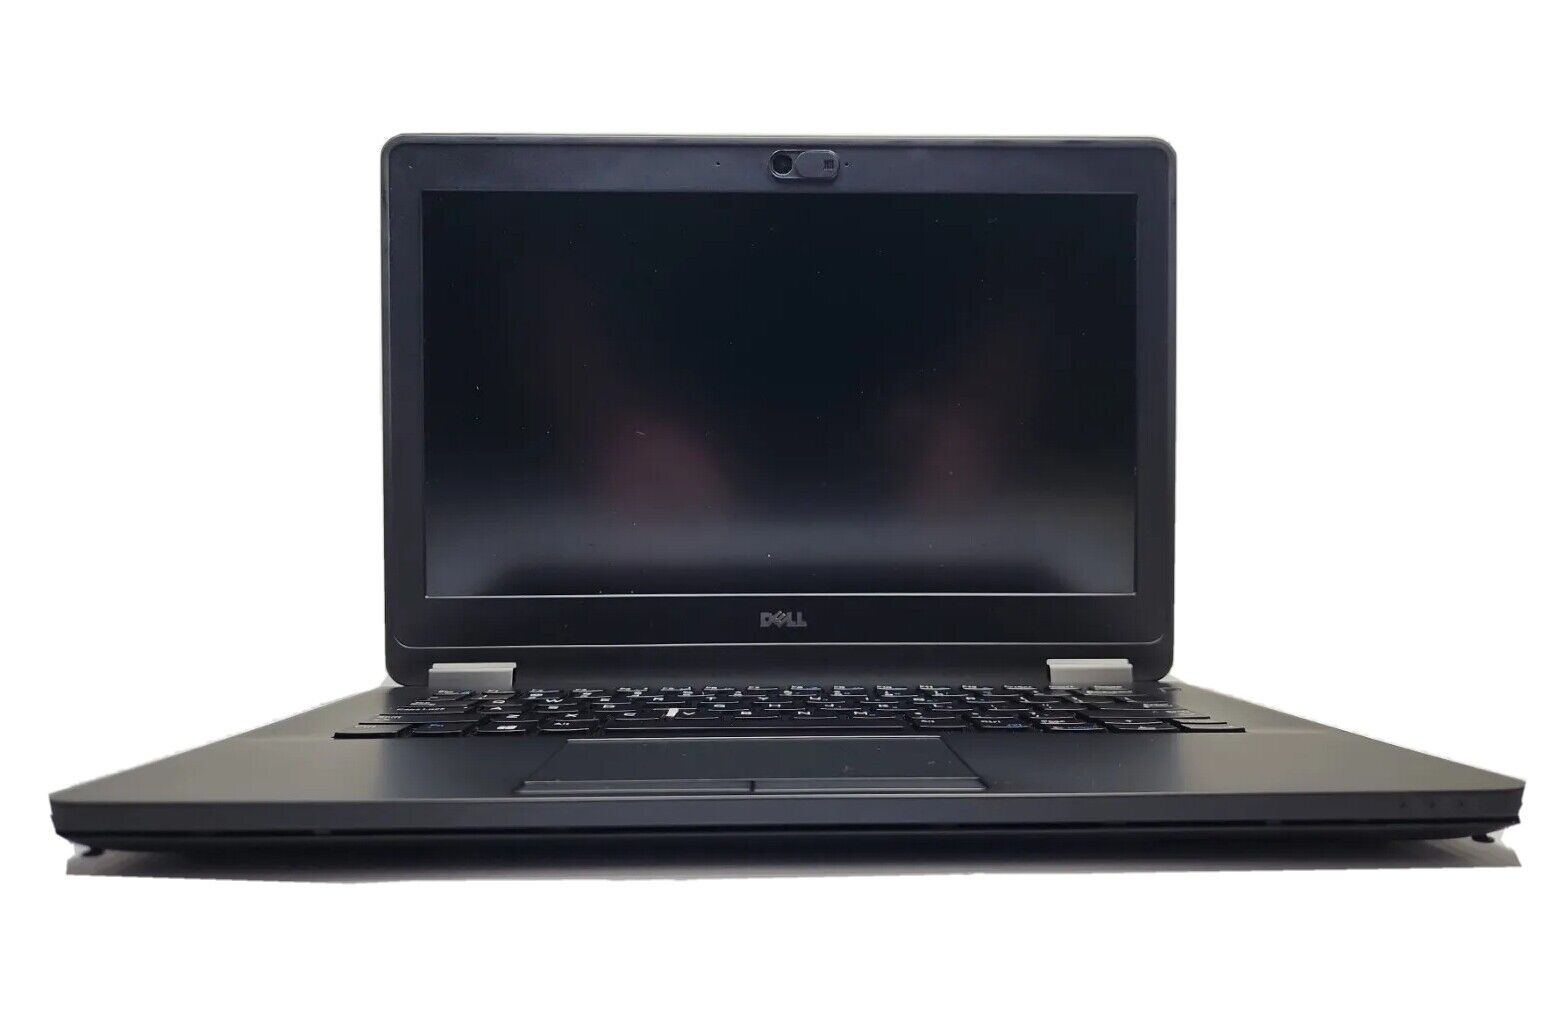 DELL LATITUDE E7270 LAPTOP COMPUTER AS IS PARTS